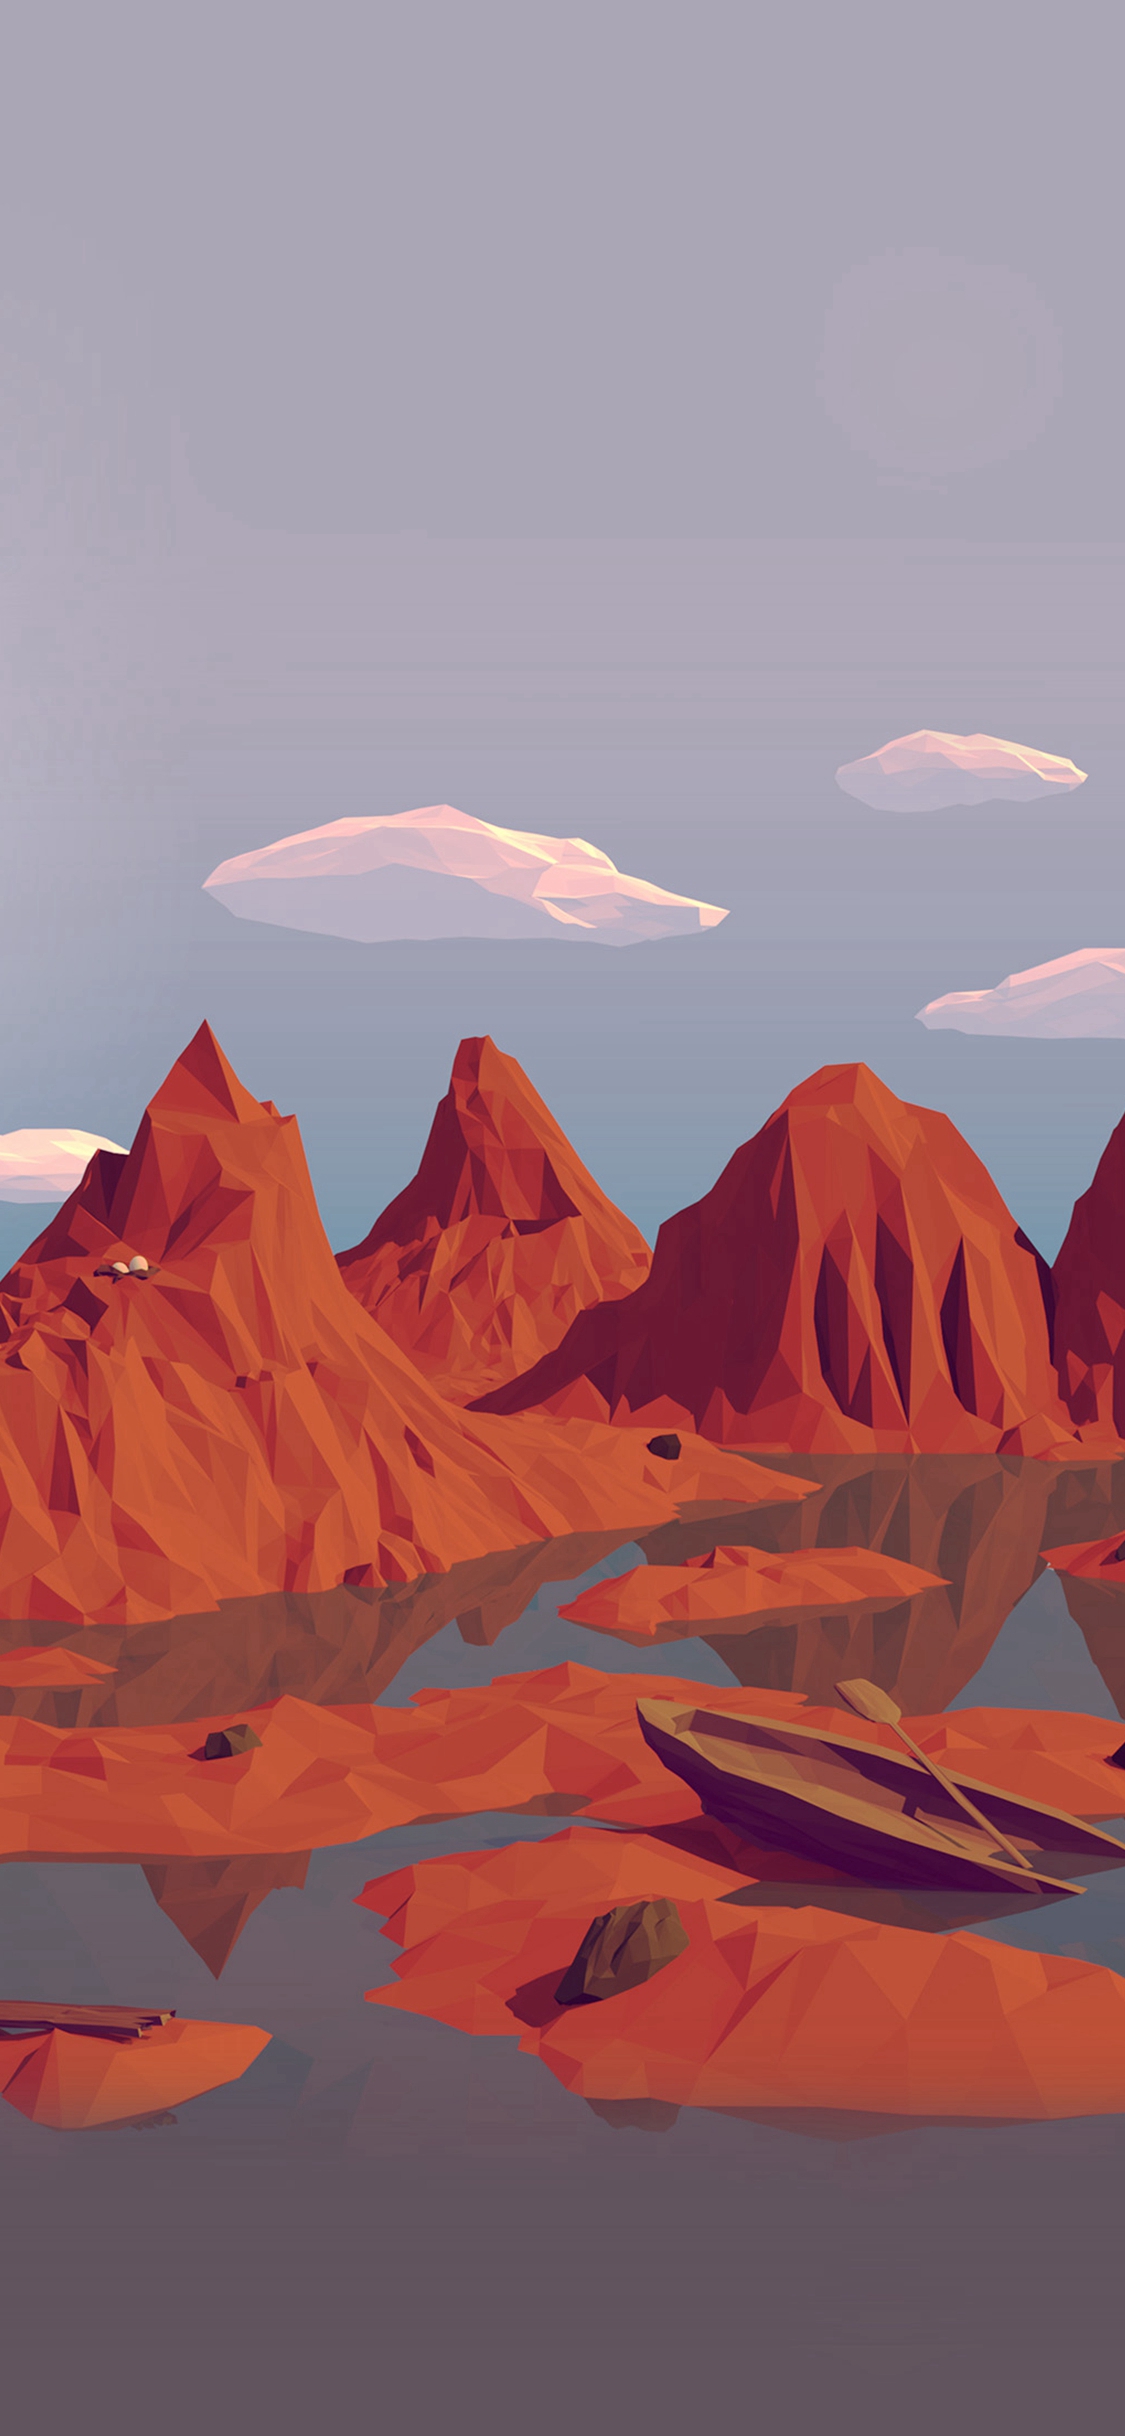 Low Poly Art Mountain Red Illust Art iPhone X Wallpaper Free Download